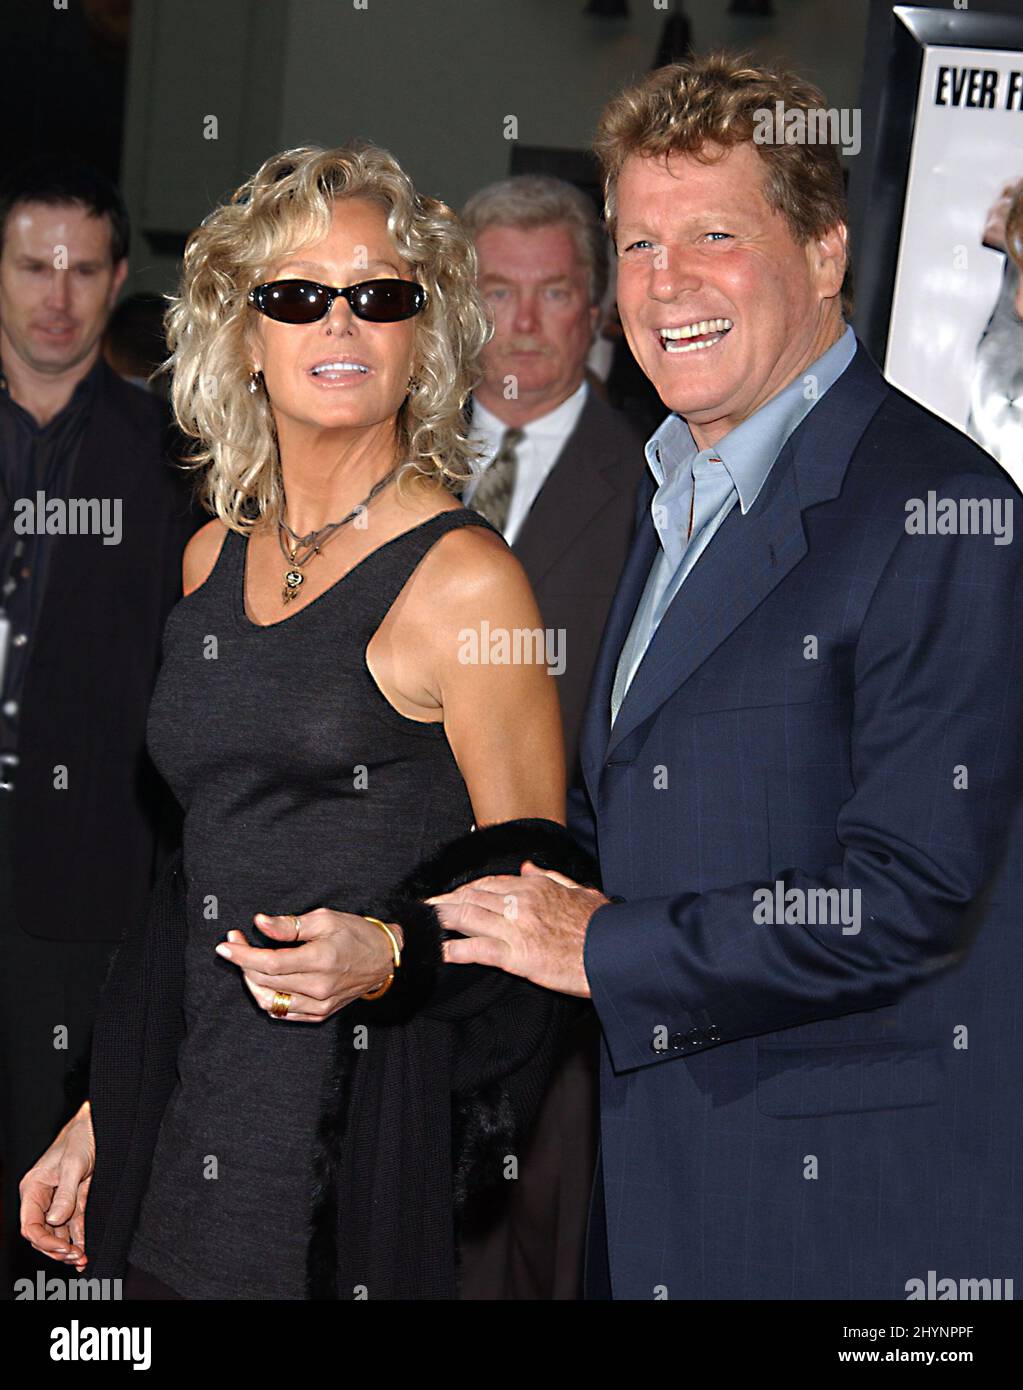 FARRAH FAWCETT & RYAN O'NEAL ATTEND THE MALIBU'S MOST WANTED FILM PREMIERE IN HOLLYWOOD PICTURE: UK PRESS Stock Photo